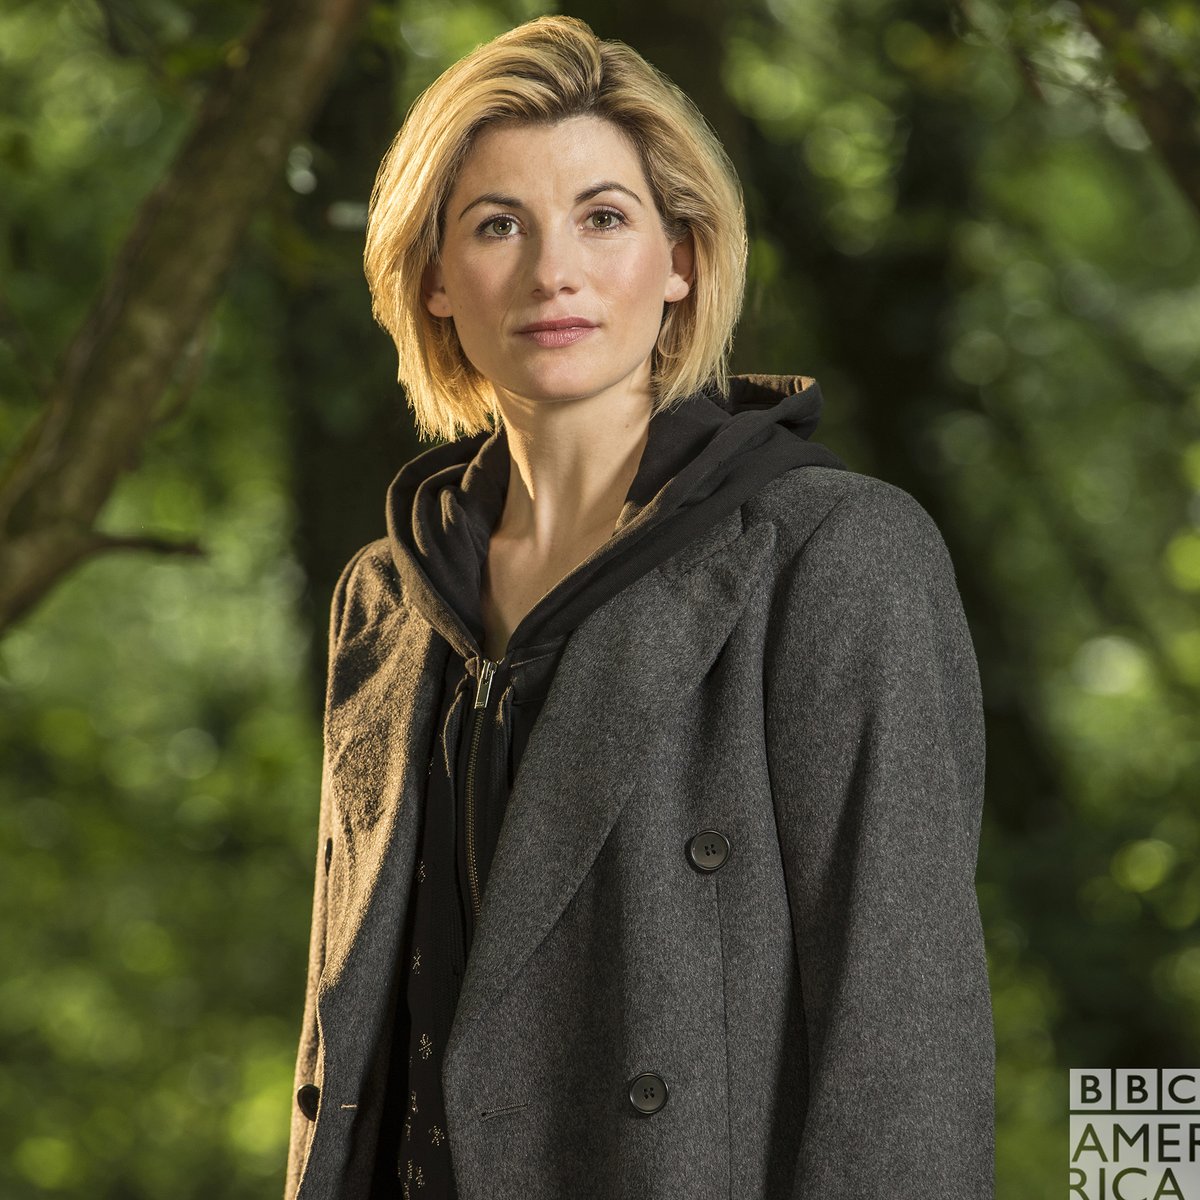 A Female 13th Doctor:  Why This May Have Been Inevitable